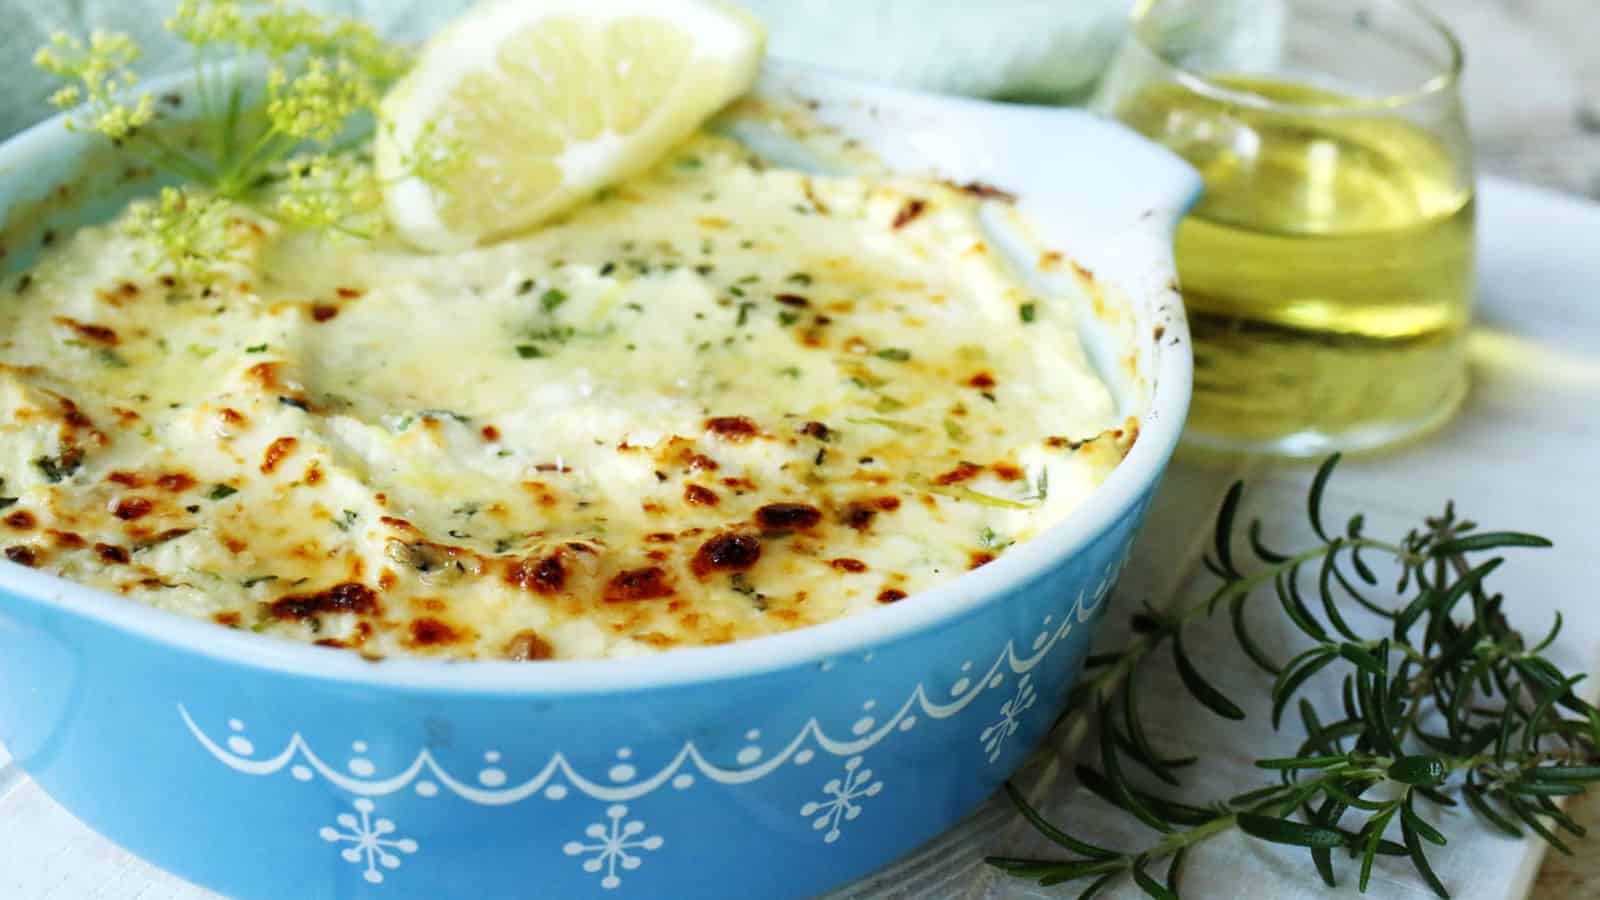 Baked ricotta cheese in a blue casserole dish with sliced bread.